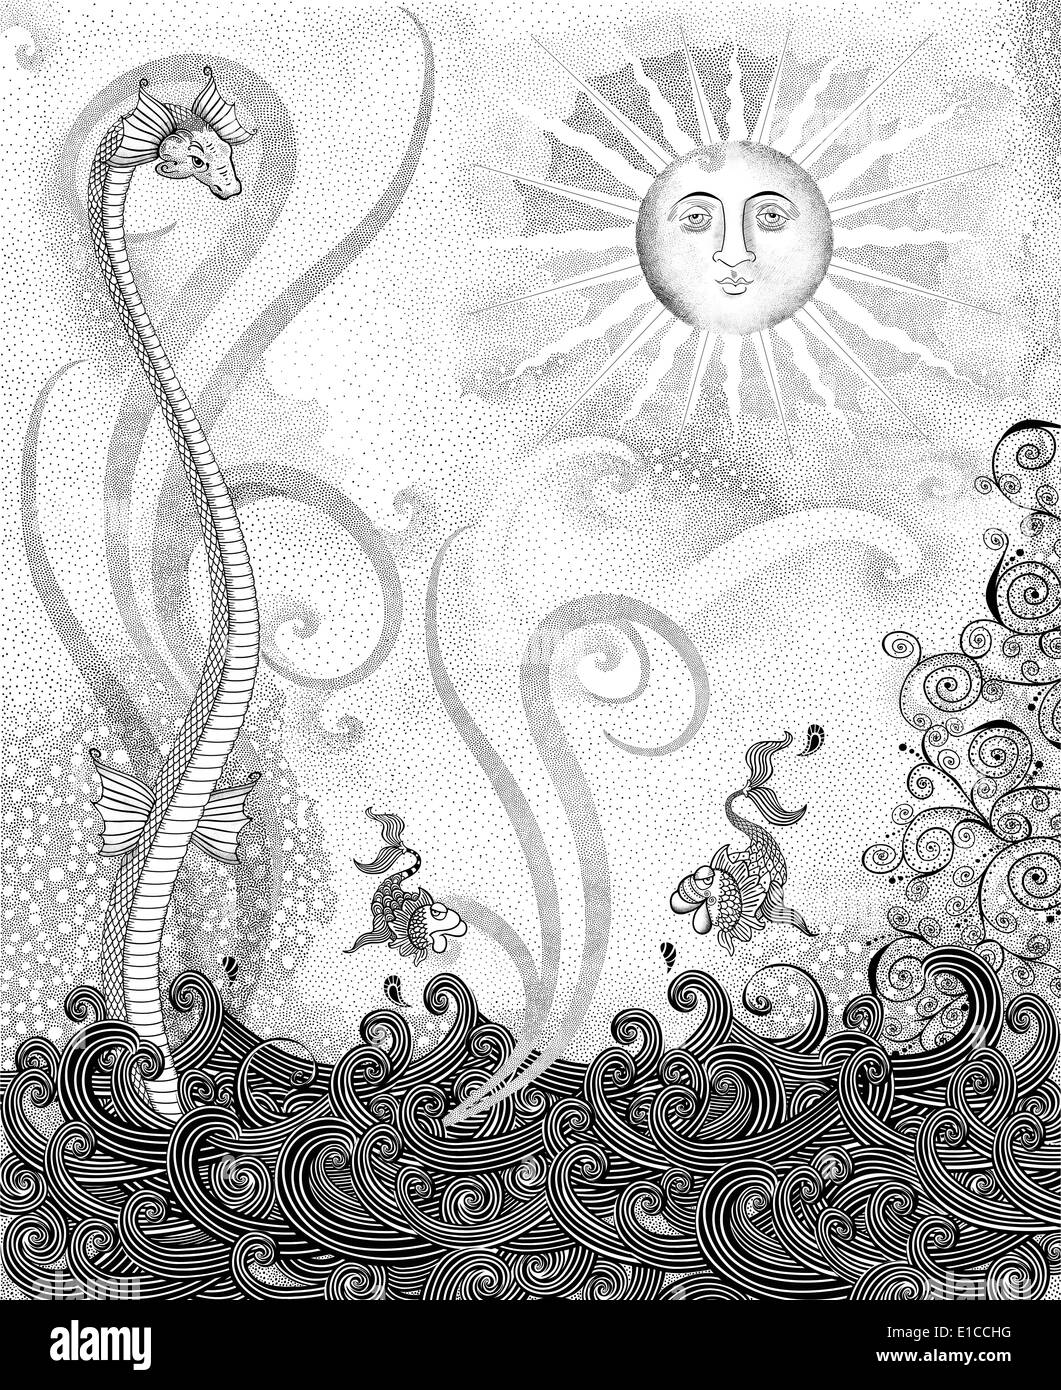 Fantasy ink drawing of sea creatures and a sun face Stock Photo